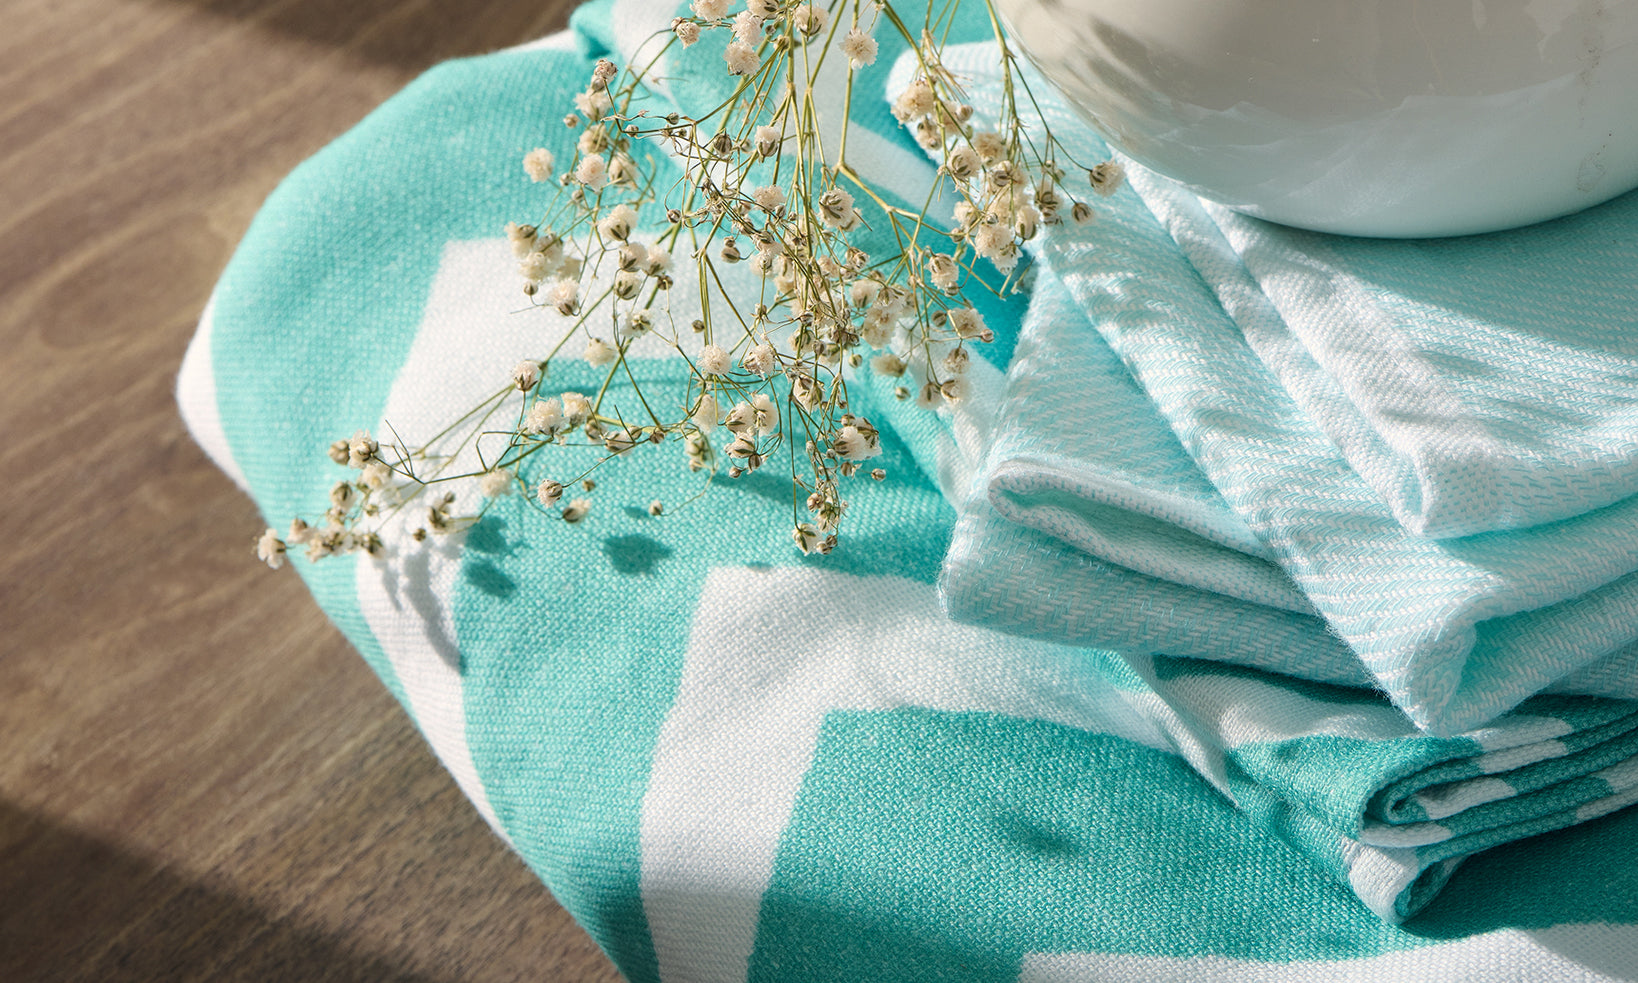 Mindful Living with Oodaii: How Home Textiles Enhance Well-Being